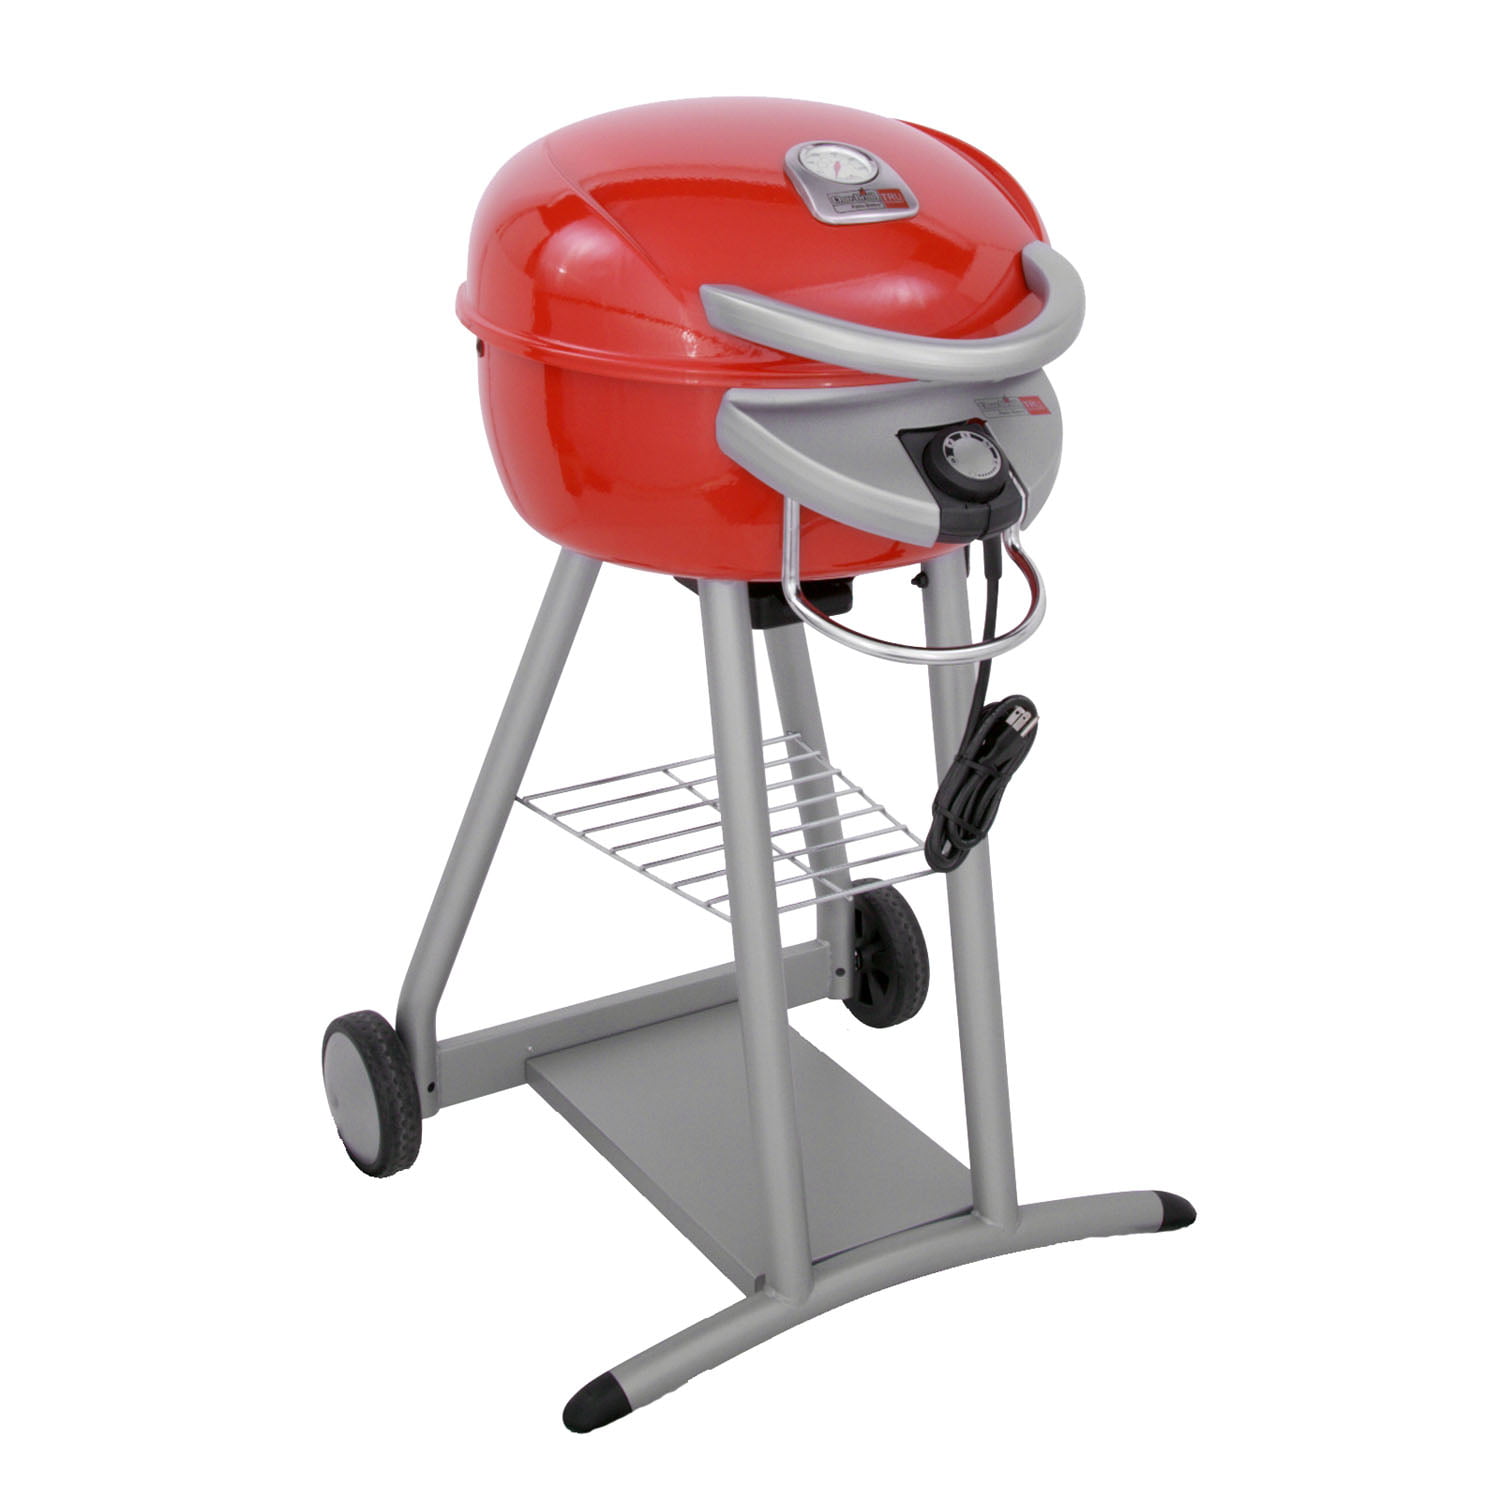 char-broil-patio-bistro-infrared-240-square-inch-electric-grill-red